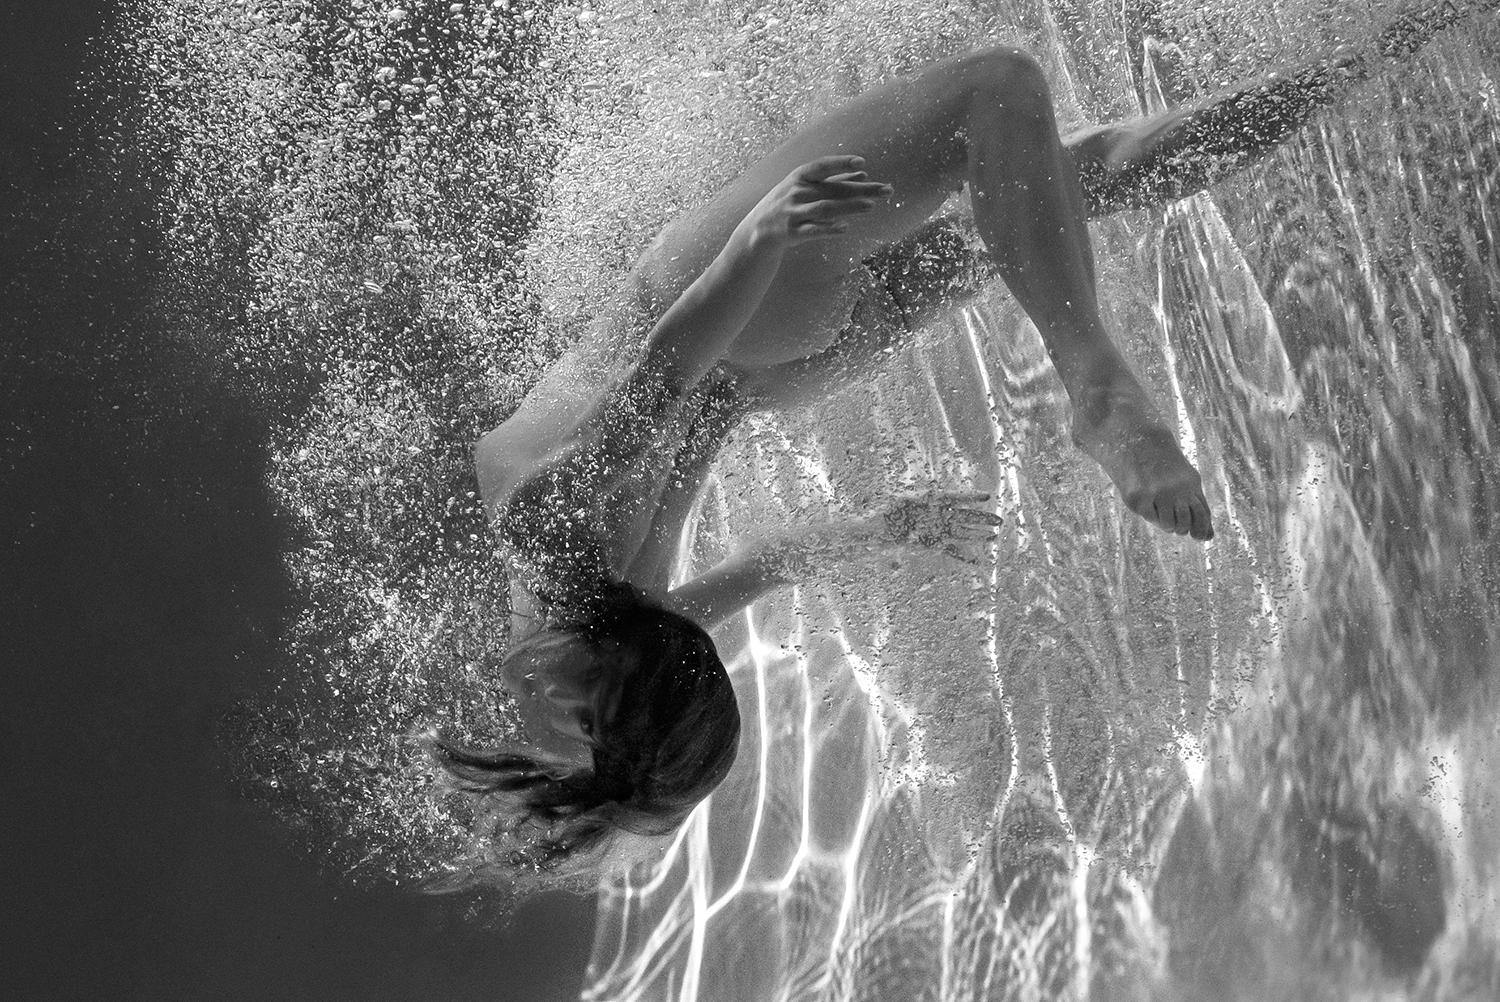 Dragon Mouth Trip - underwater black&white nude photograph - archival print  - Photorealist Photograph by Alex Sher